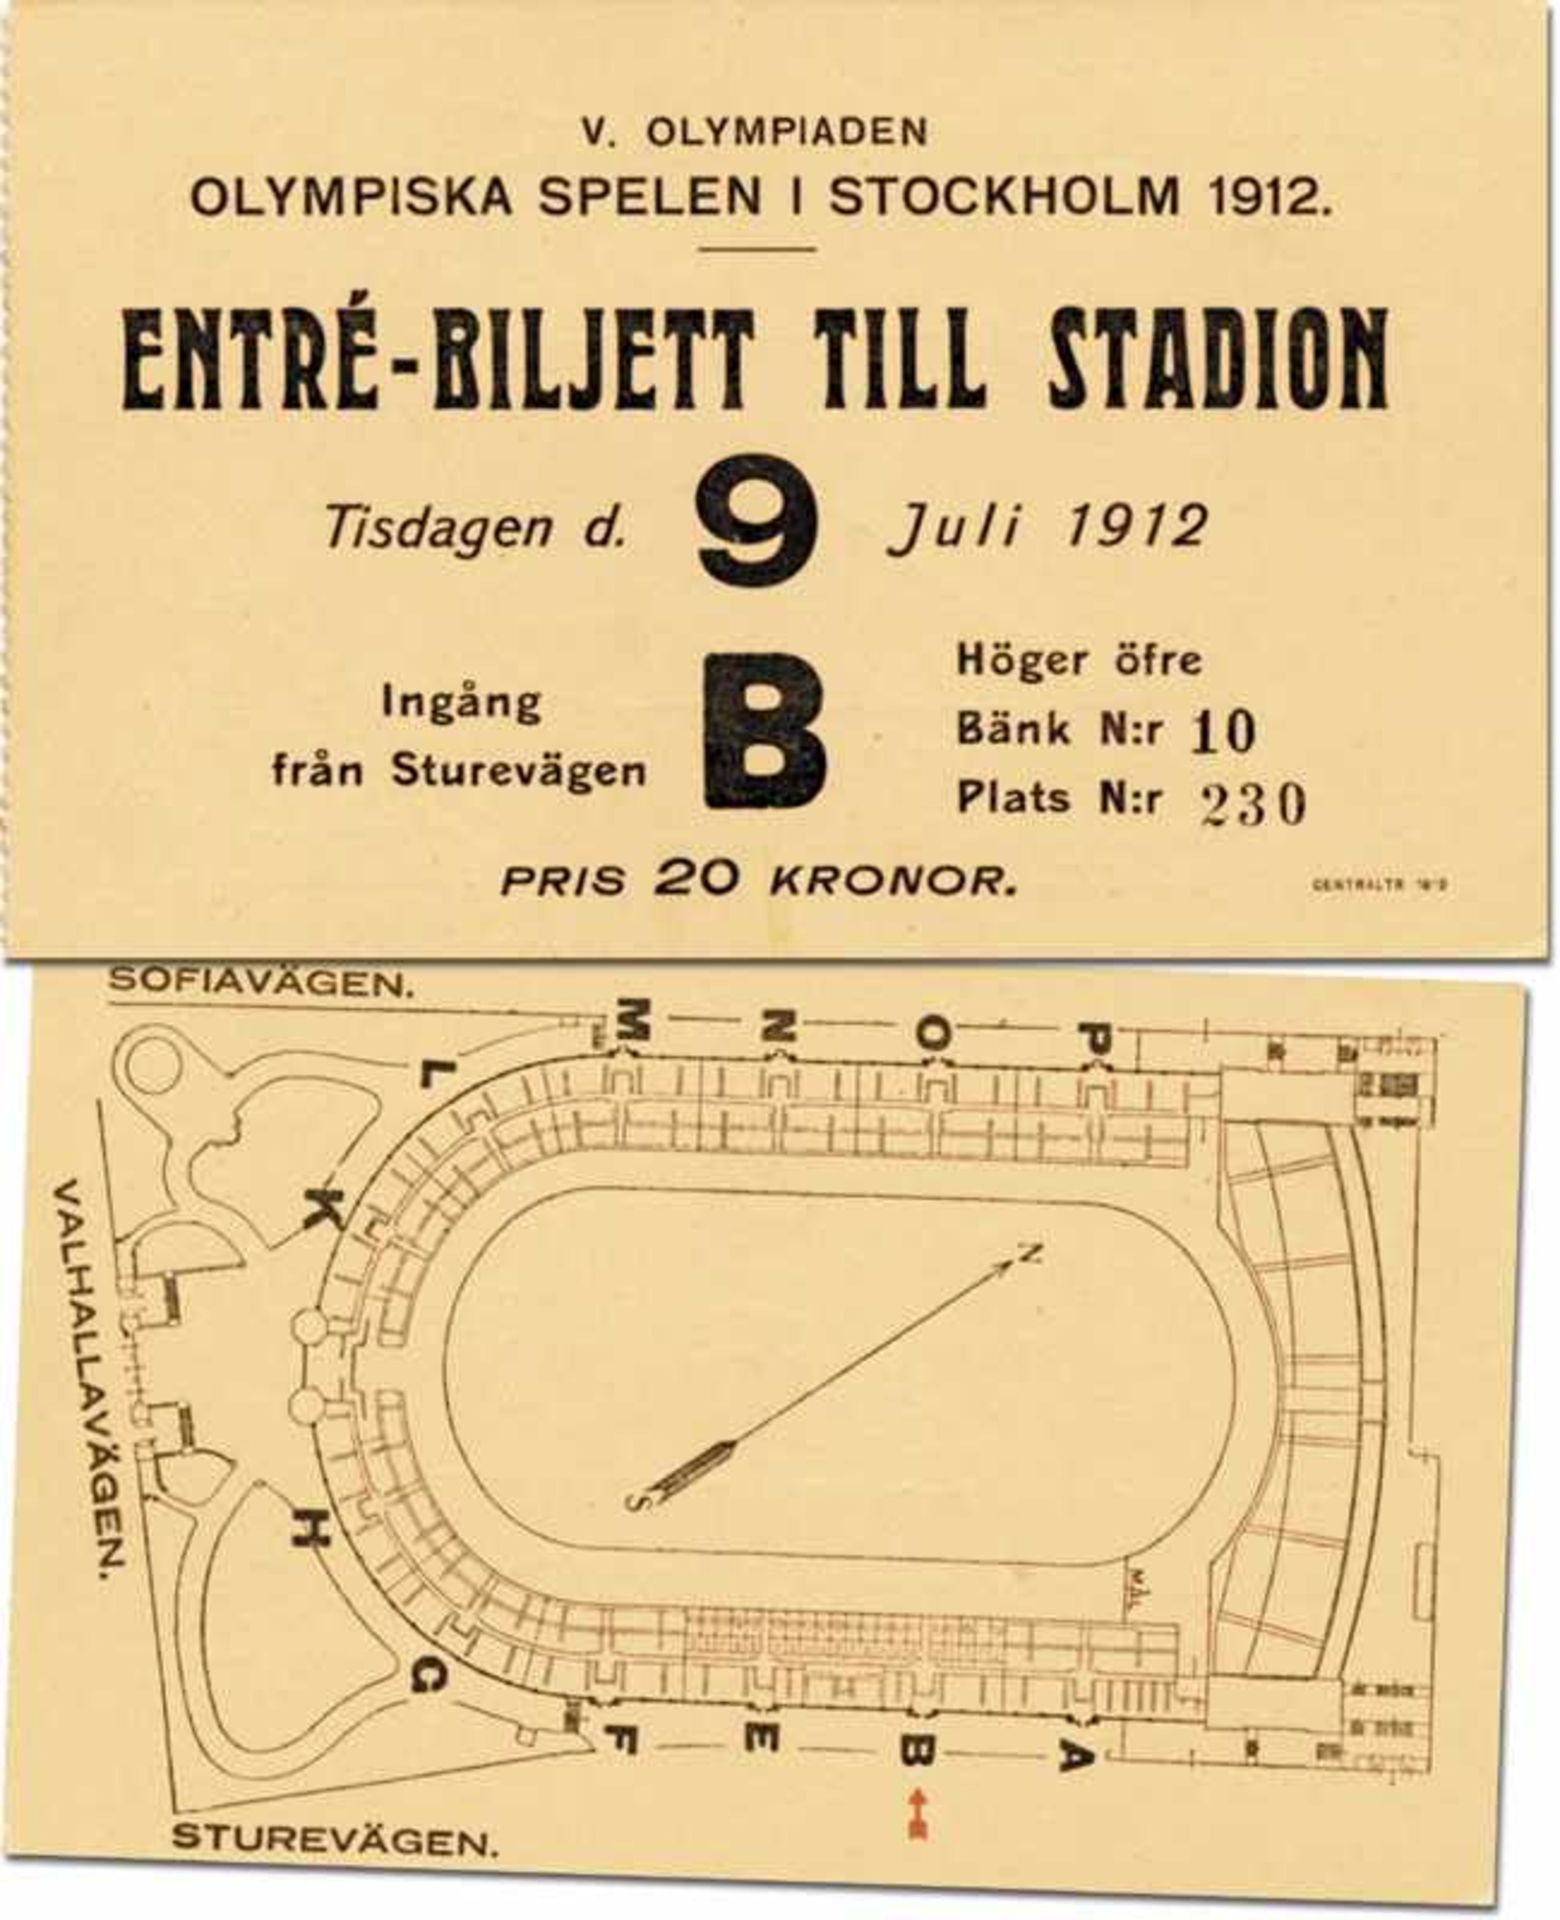 Olympic Games Stockholm 1912. Official Ticket - Official ticket for the Olympic Stadium on 9th